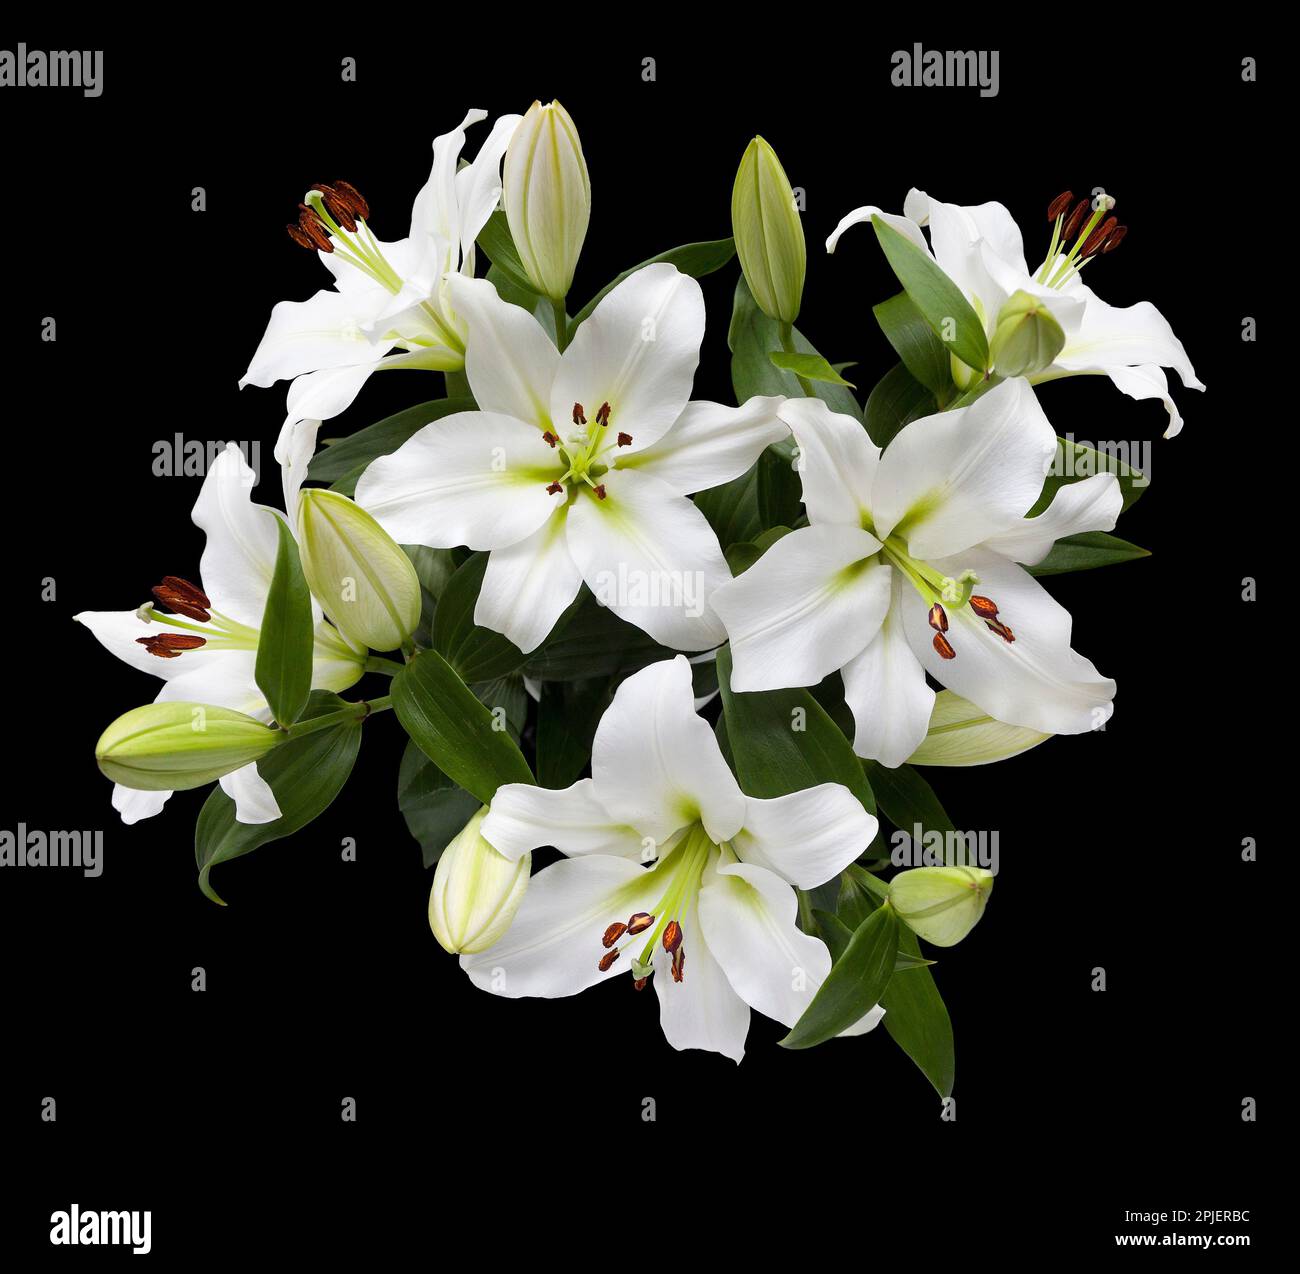 White lily flowers Stock Photo